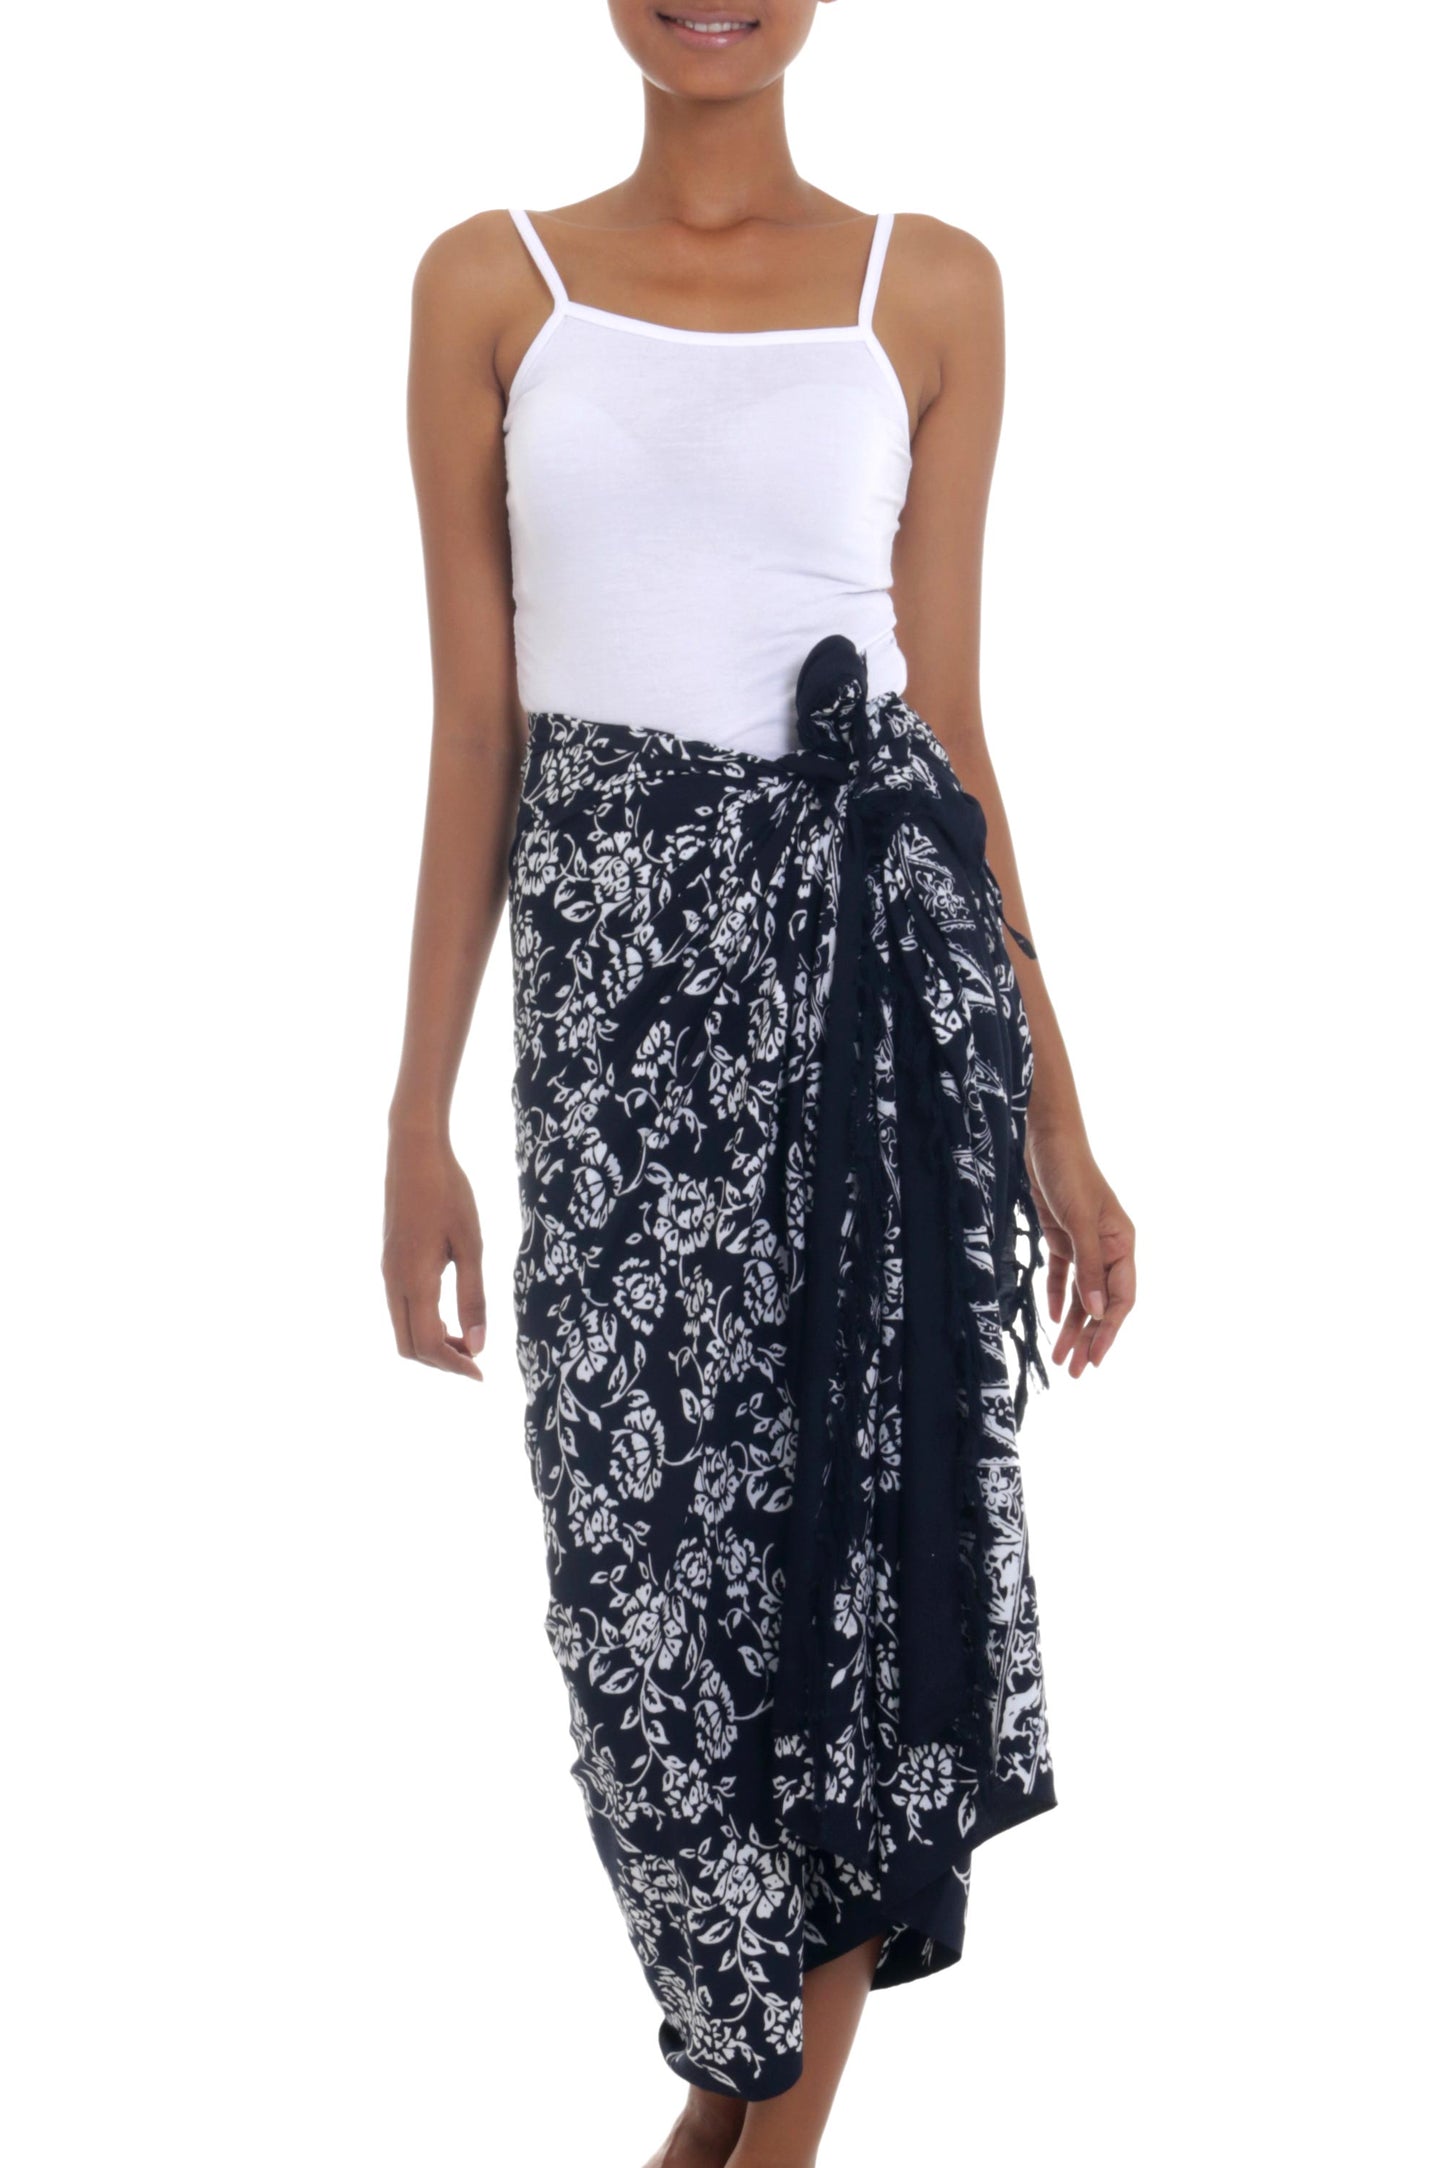 Tropical Garden in Black Black and White Rayon Sarong with Floral Batik Motifs